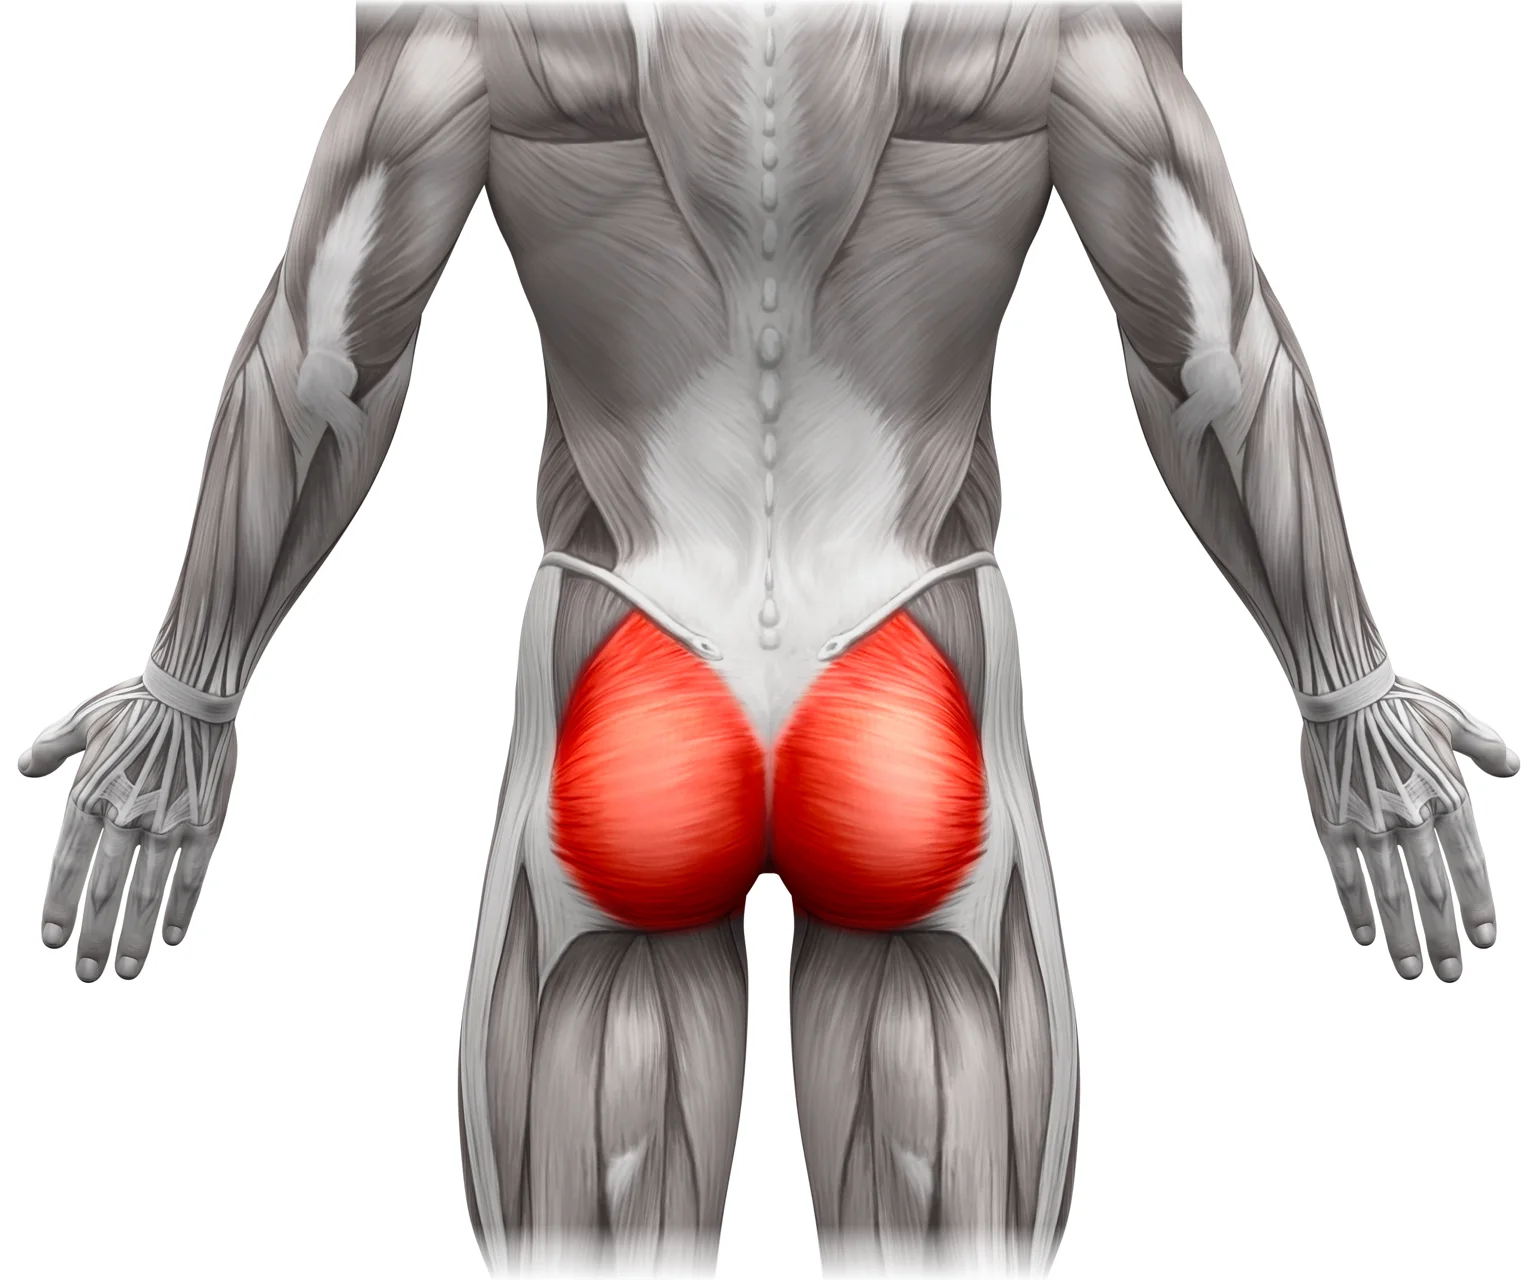 diagram - View from the rear, showing location of the glutes.